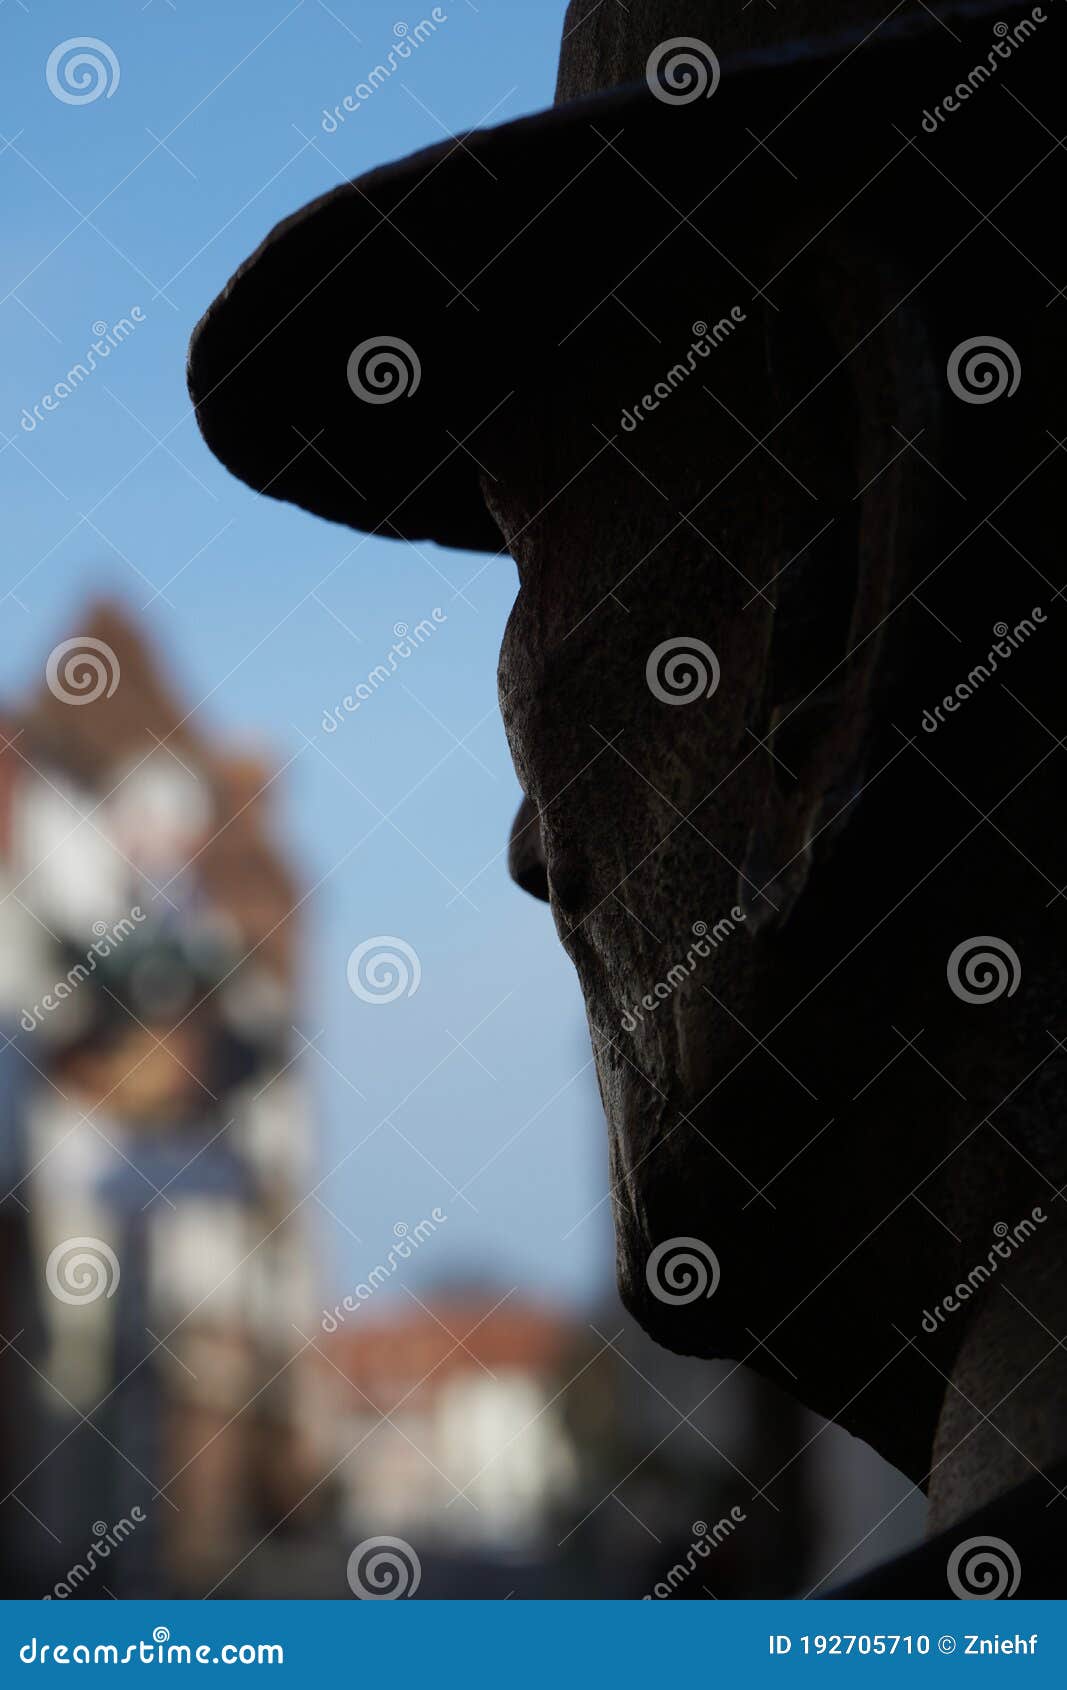 shilouette of the head of a sculpture against a blurred background with the view of buildings of a city